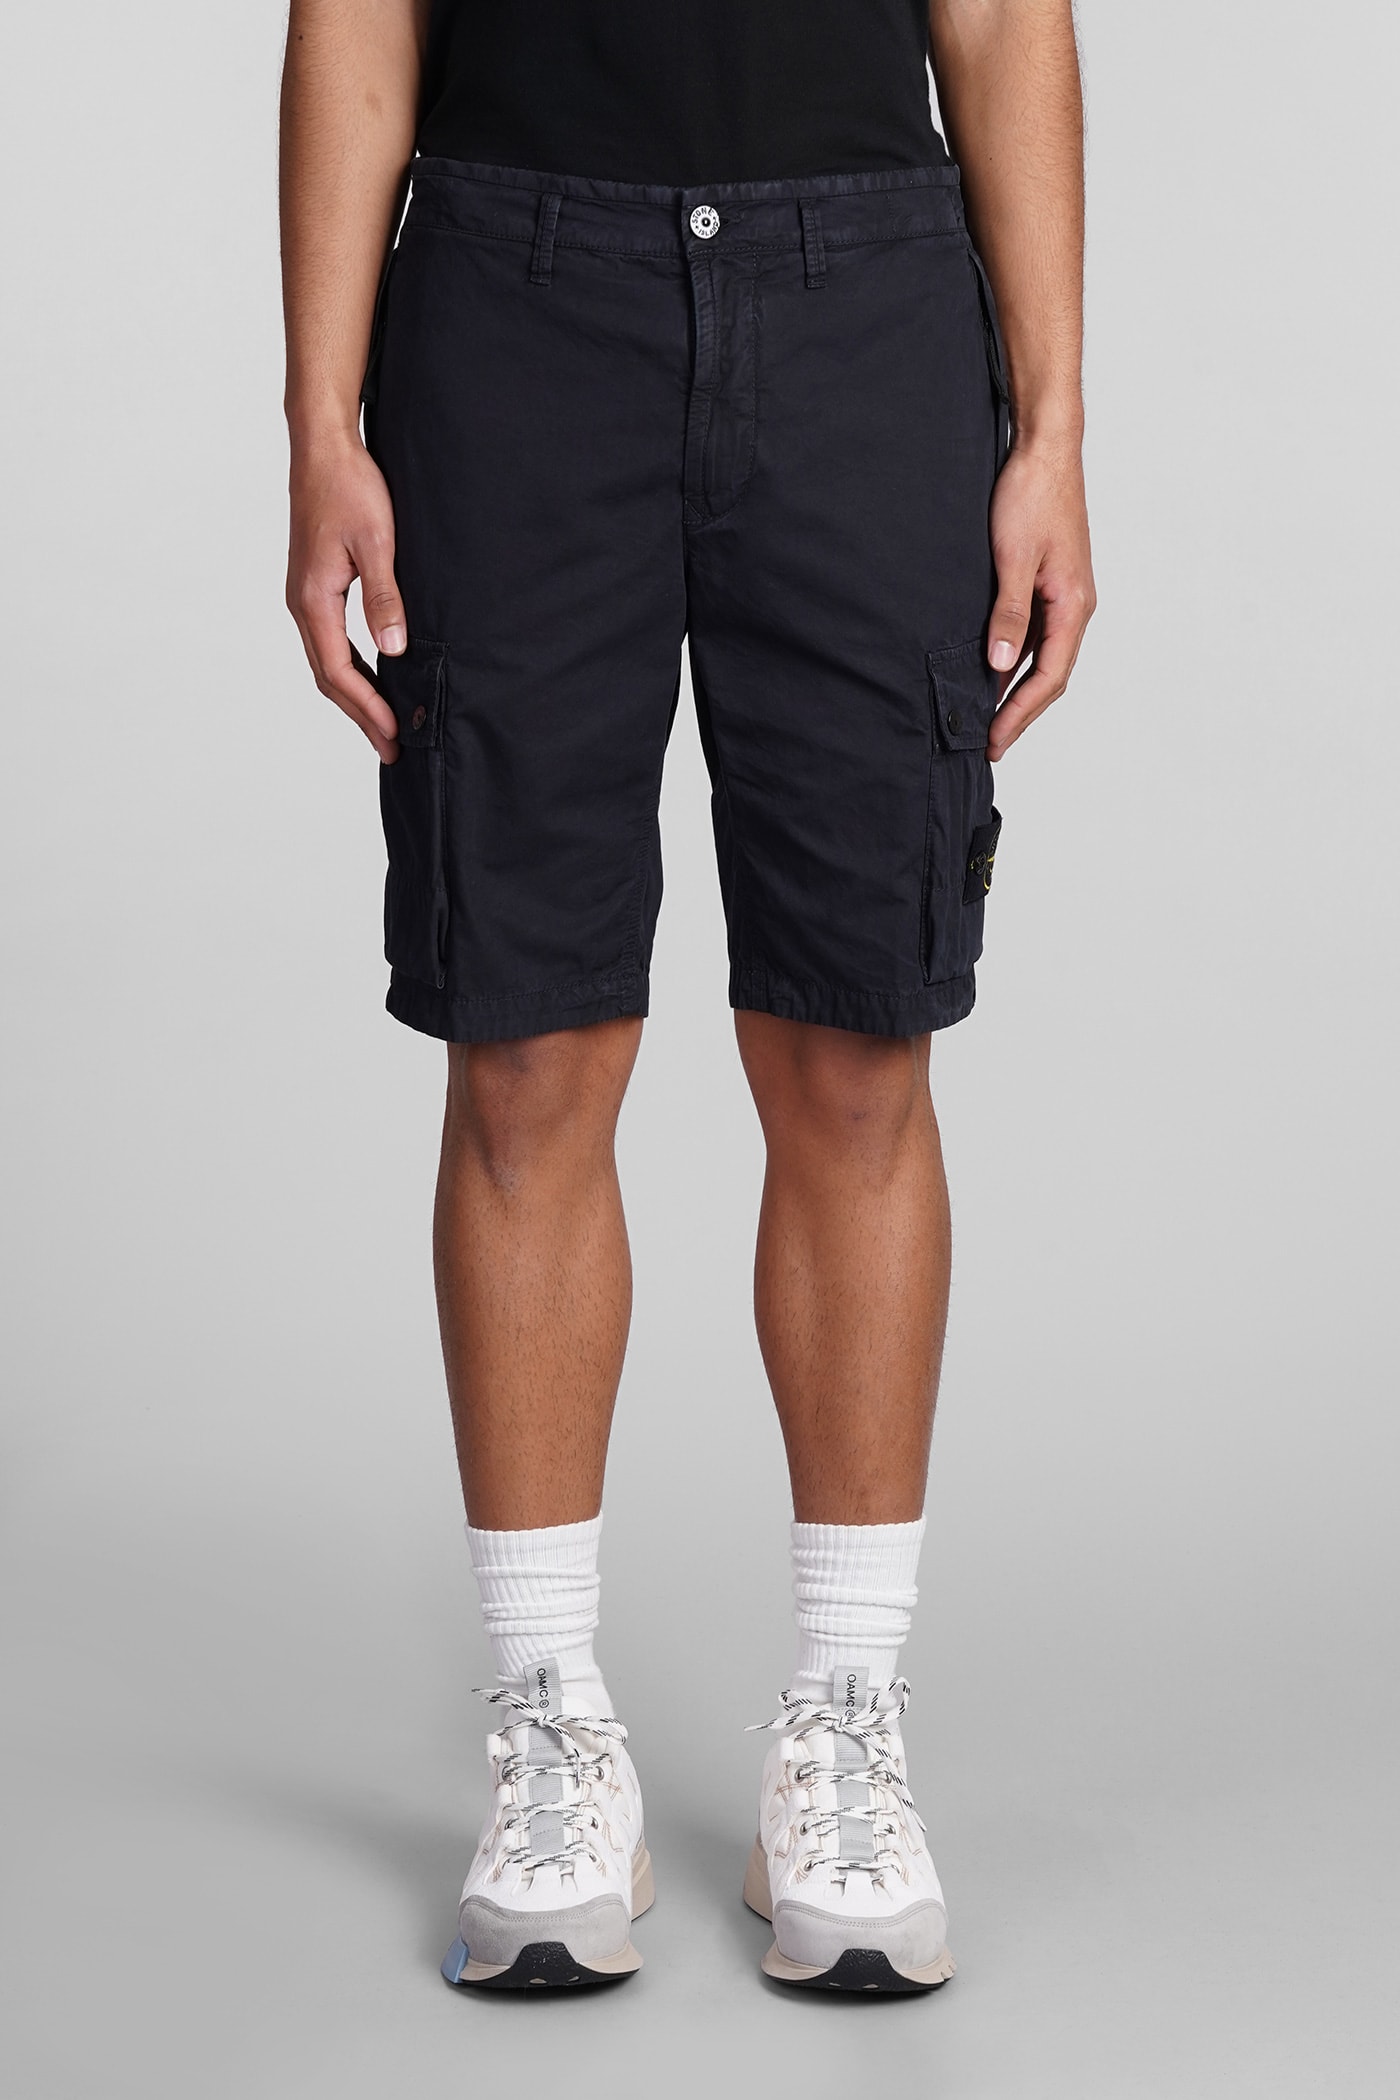 Stone Island Shorts In Blue Cotton